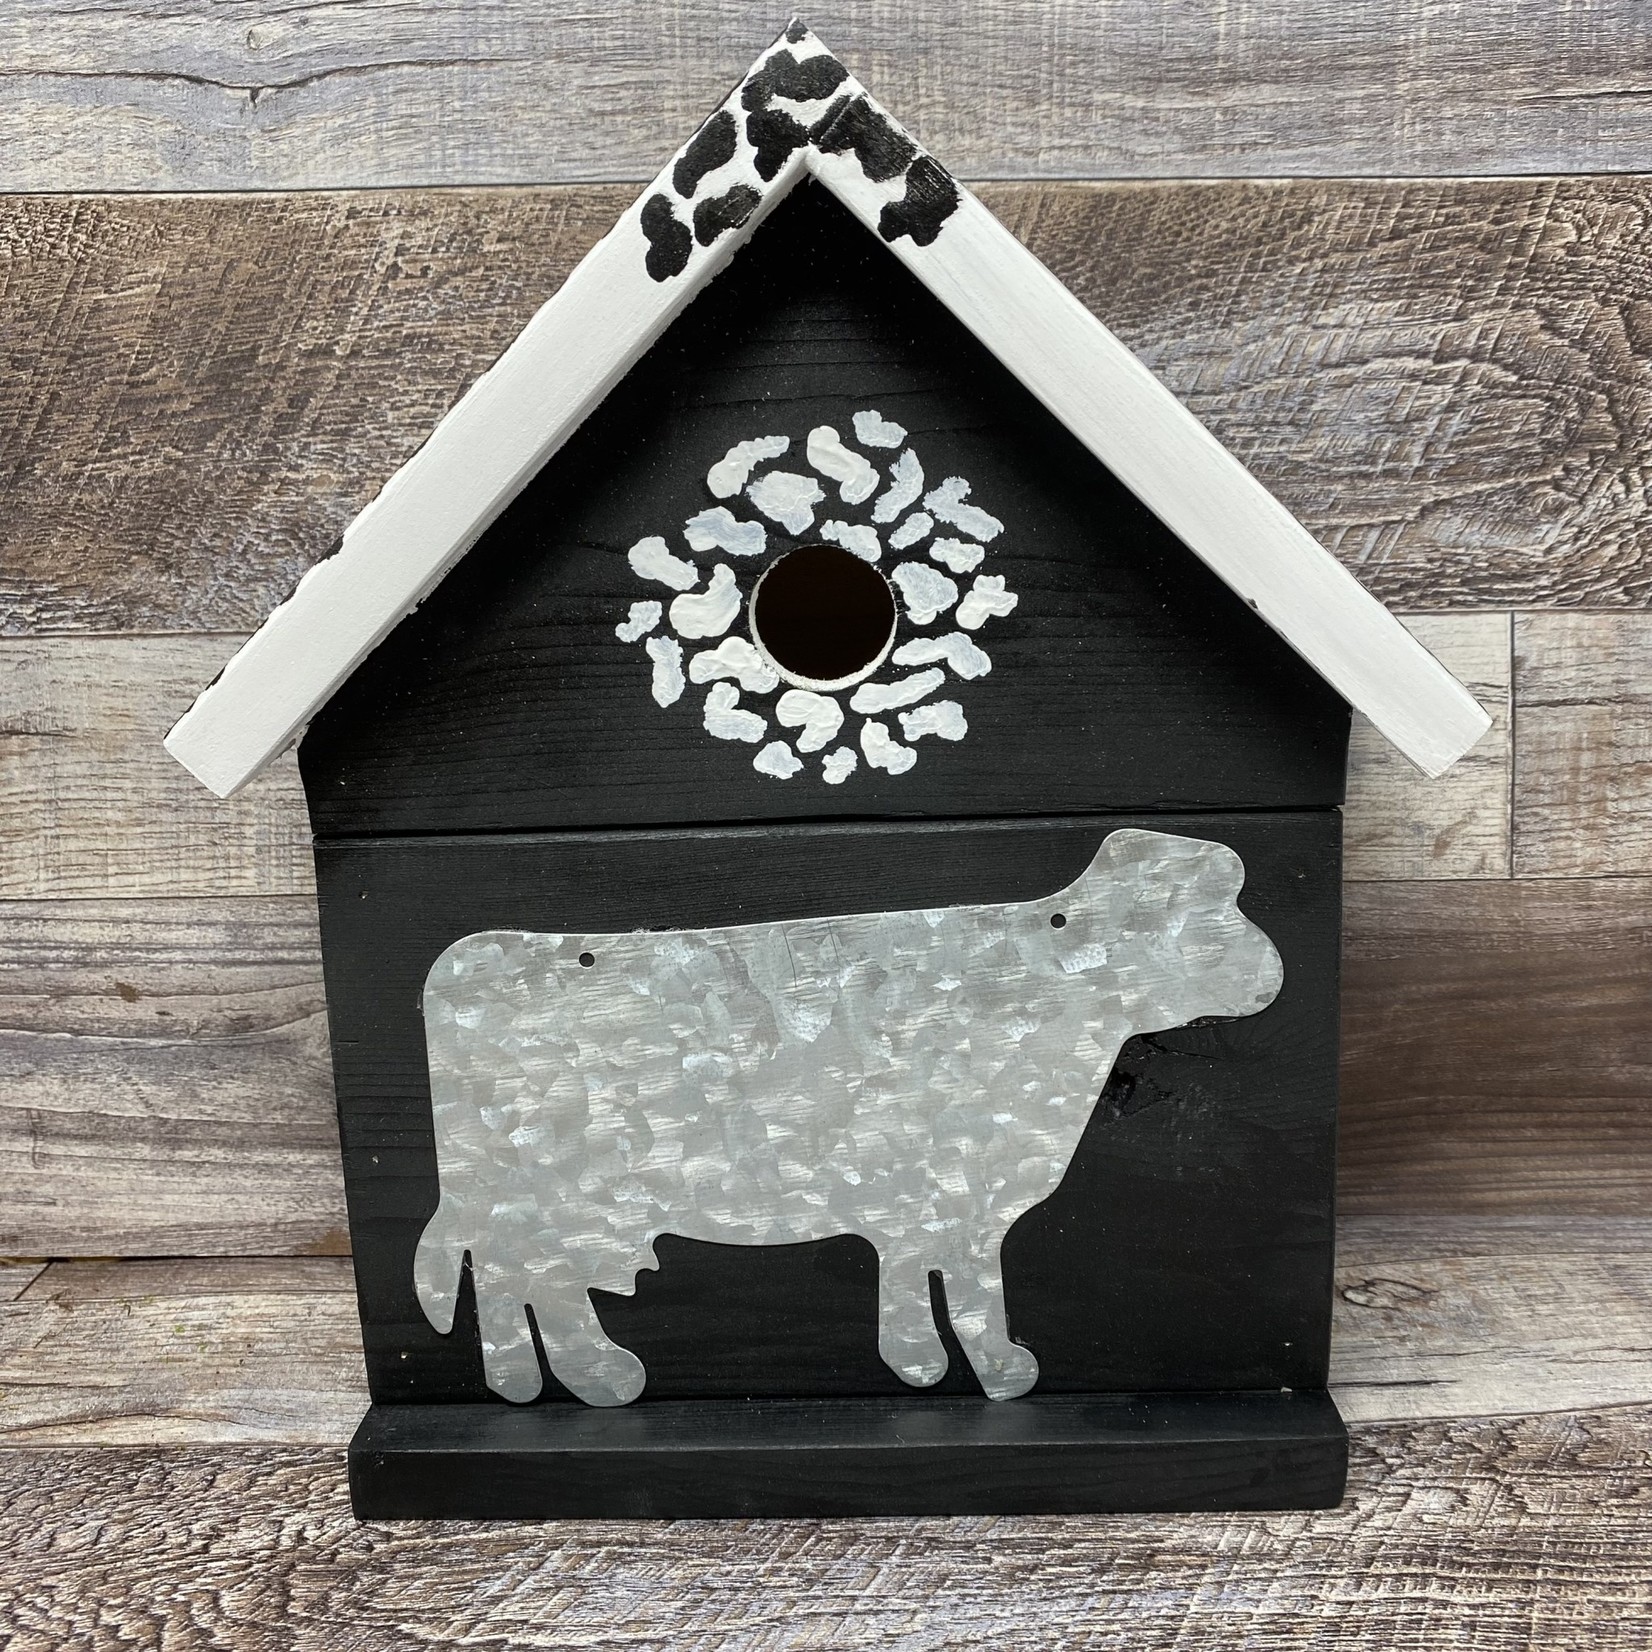 Vern's Painted Bird House - Black and White Cow Print